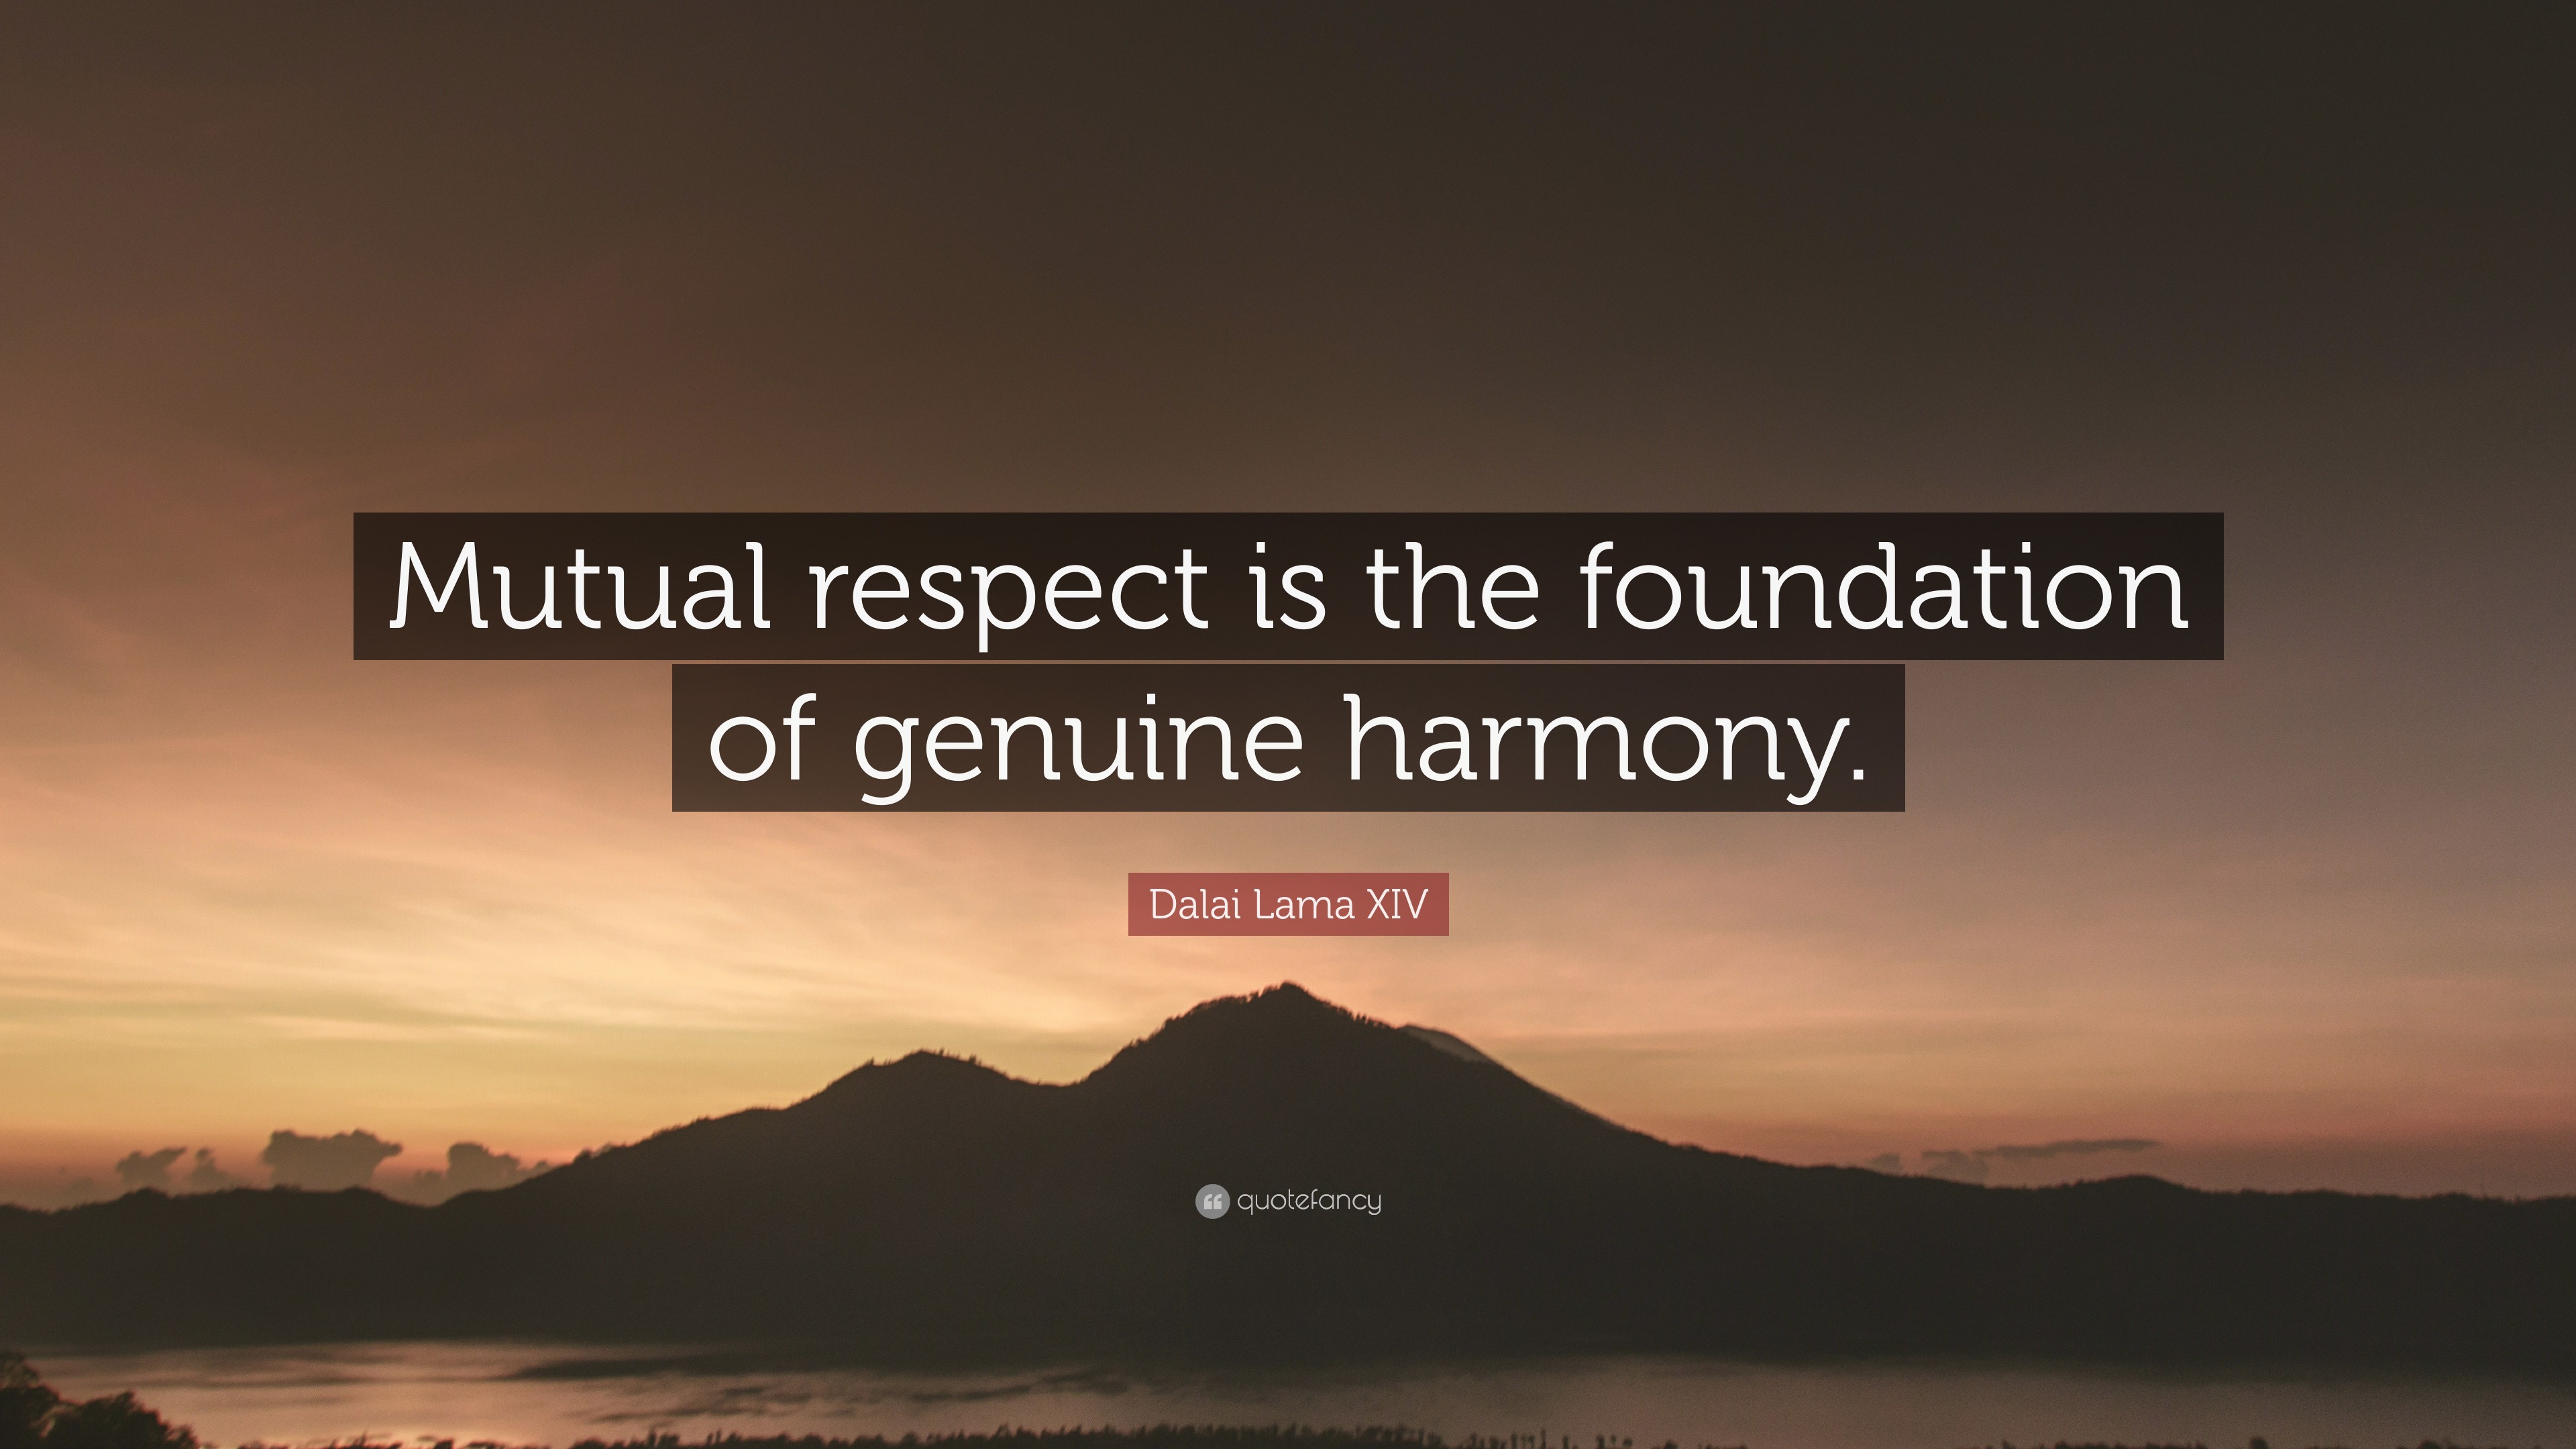 Dalai Lama Xiv Quote Mutual Respect Is The Foundation Of Genuine Harmony 9 Wallpapers Quotefancy